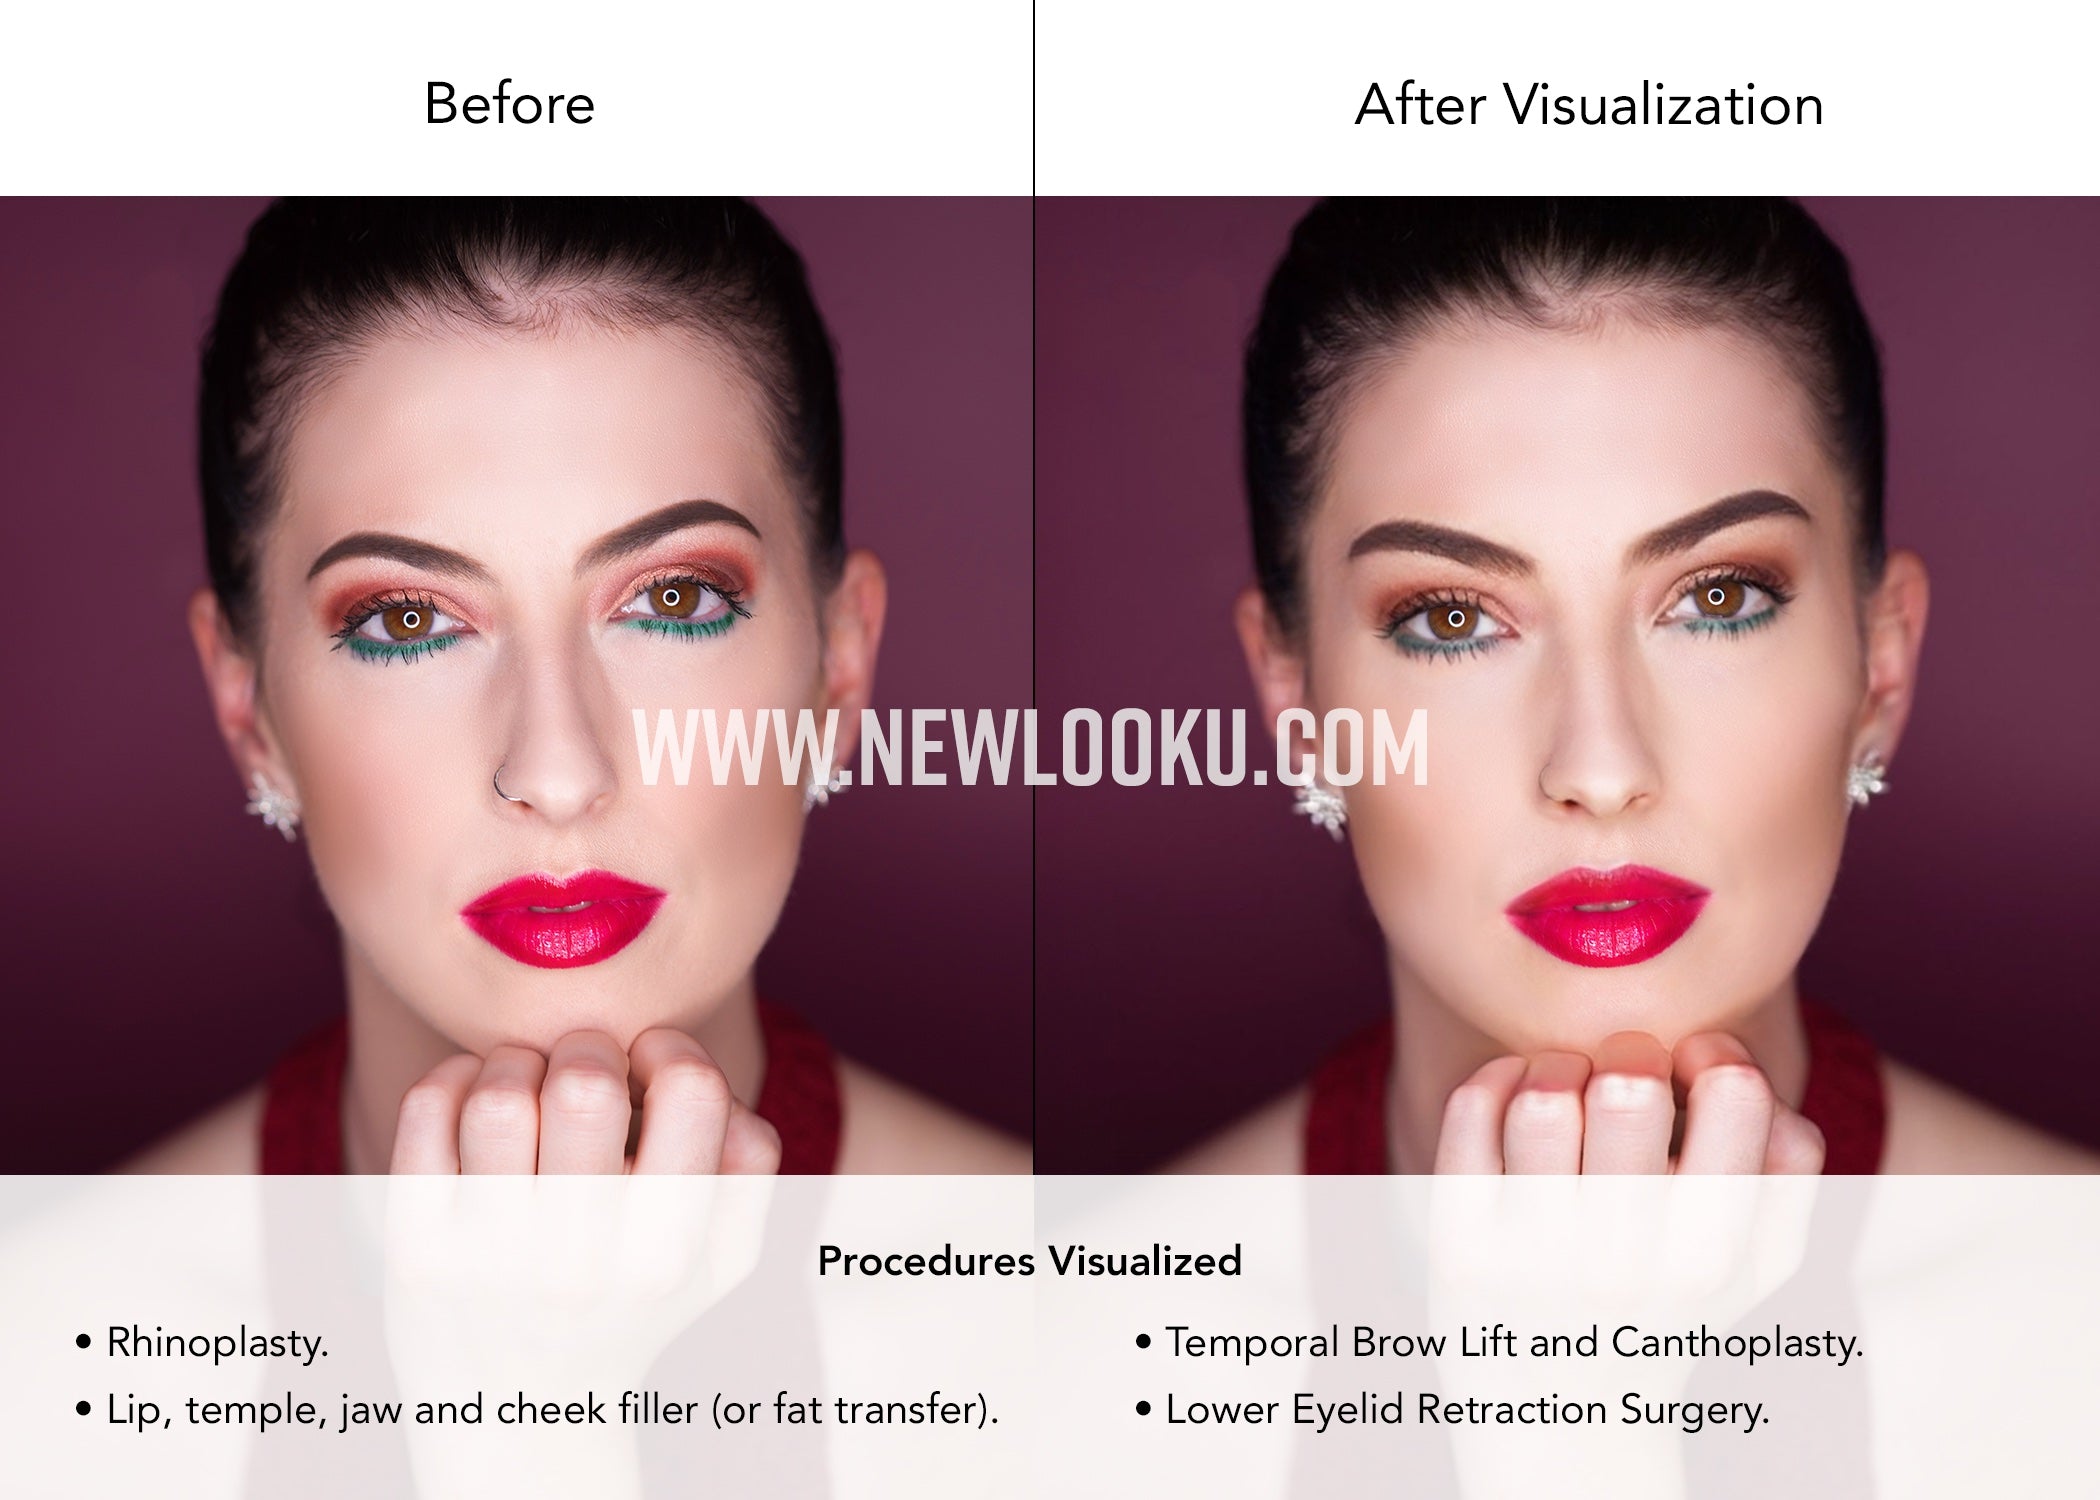 Female Plastic Surgery Visualization Before and After: Rhinoplasty. Temporal Brow Lift and Canthoplasty. Lower Eyelid Retraction Surgery. Lip, temple, jaw and cheek filler (or fat transfer).